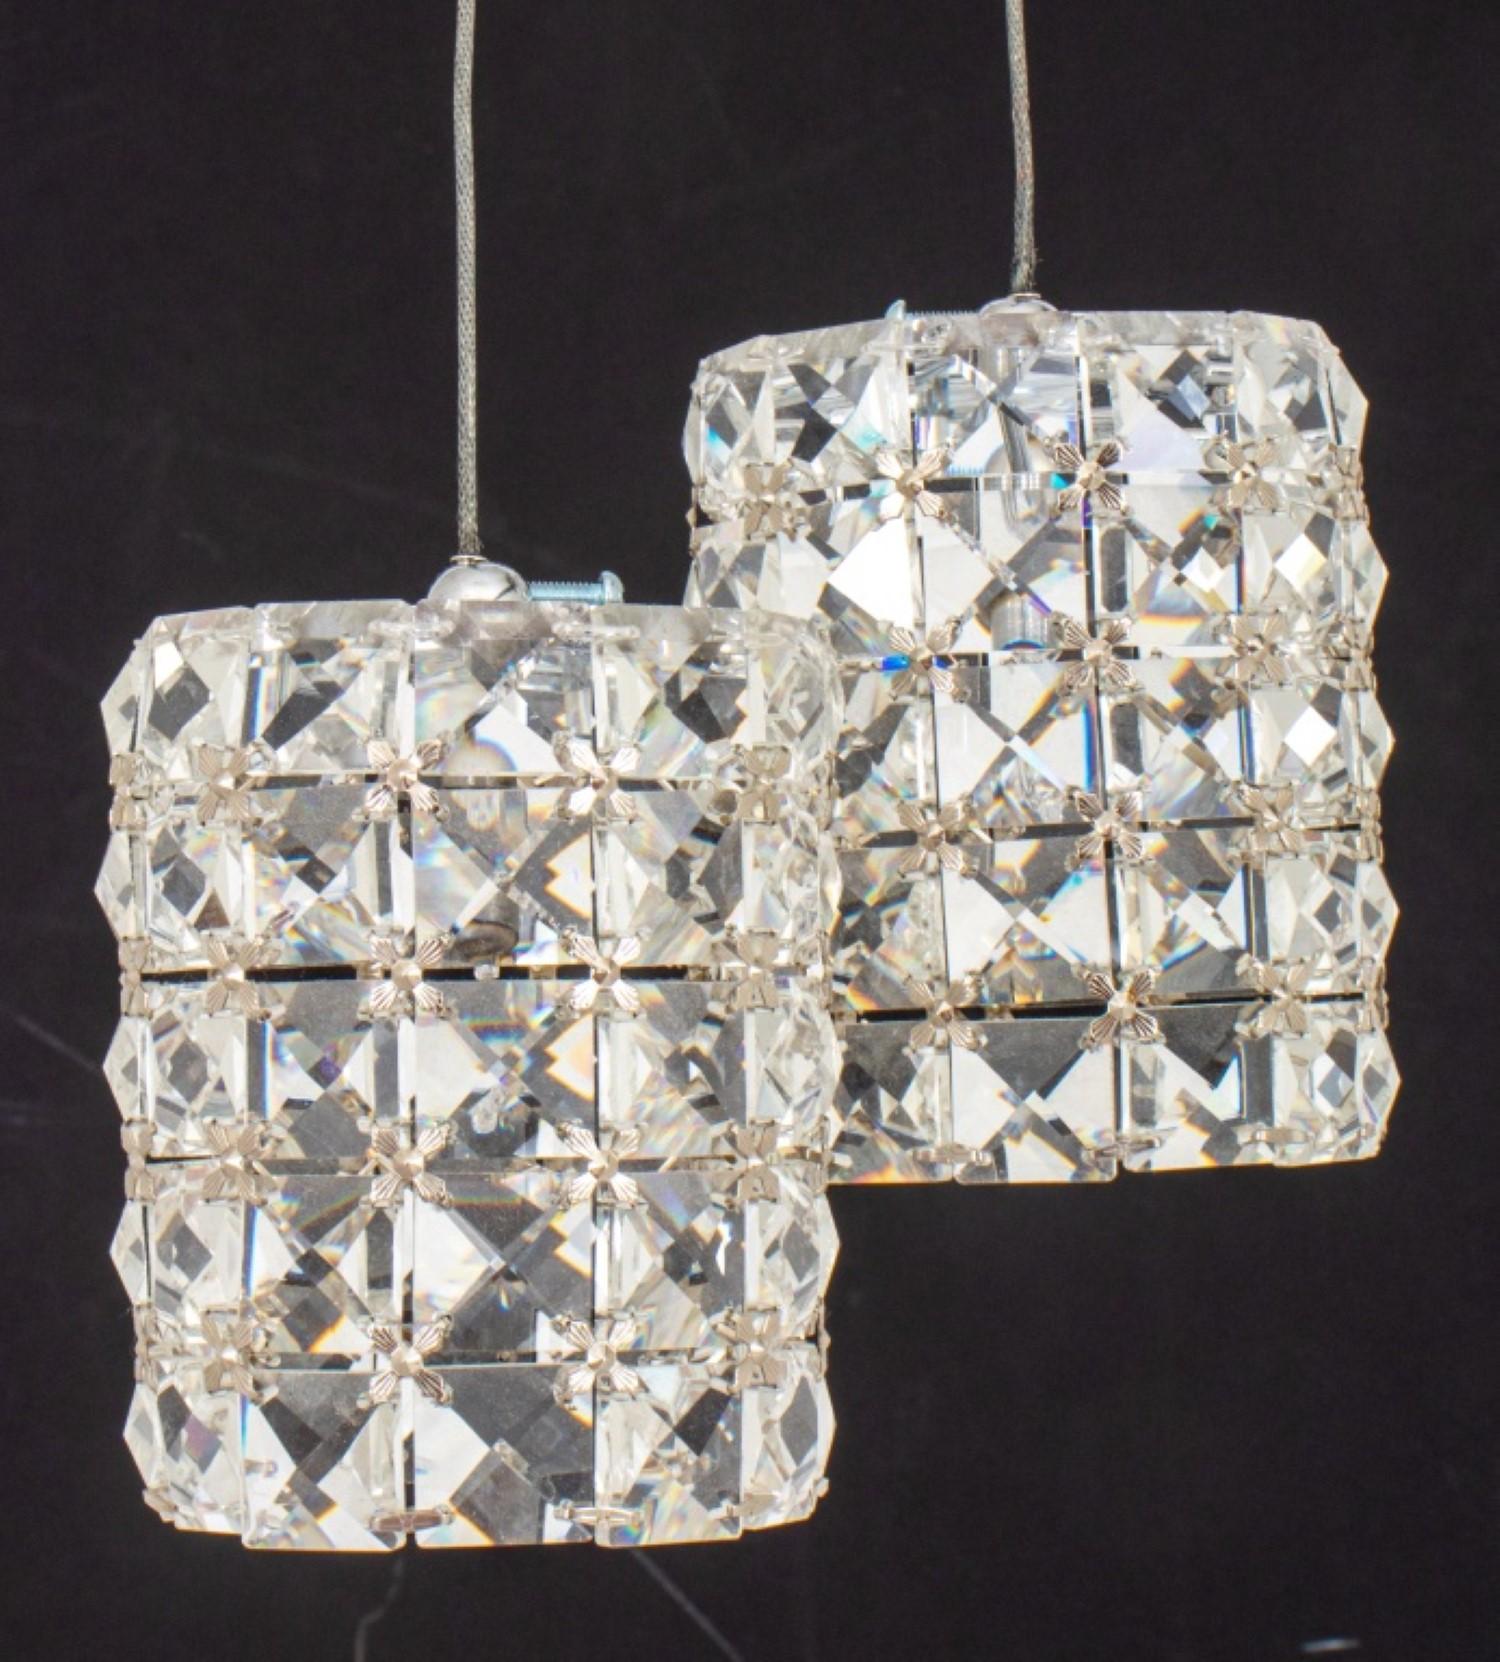 Pair of Hollywood Glam crystal pendant drop  lighting fixtures, with spherical chromed  canopies with pendant lights in  Swarovski-style crystal drum shades. 

Dealer: S138XX

